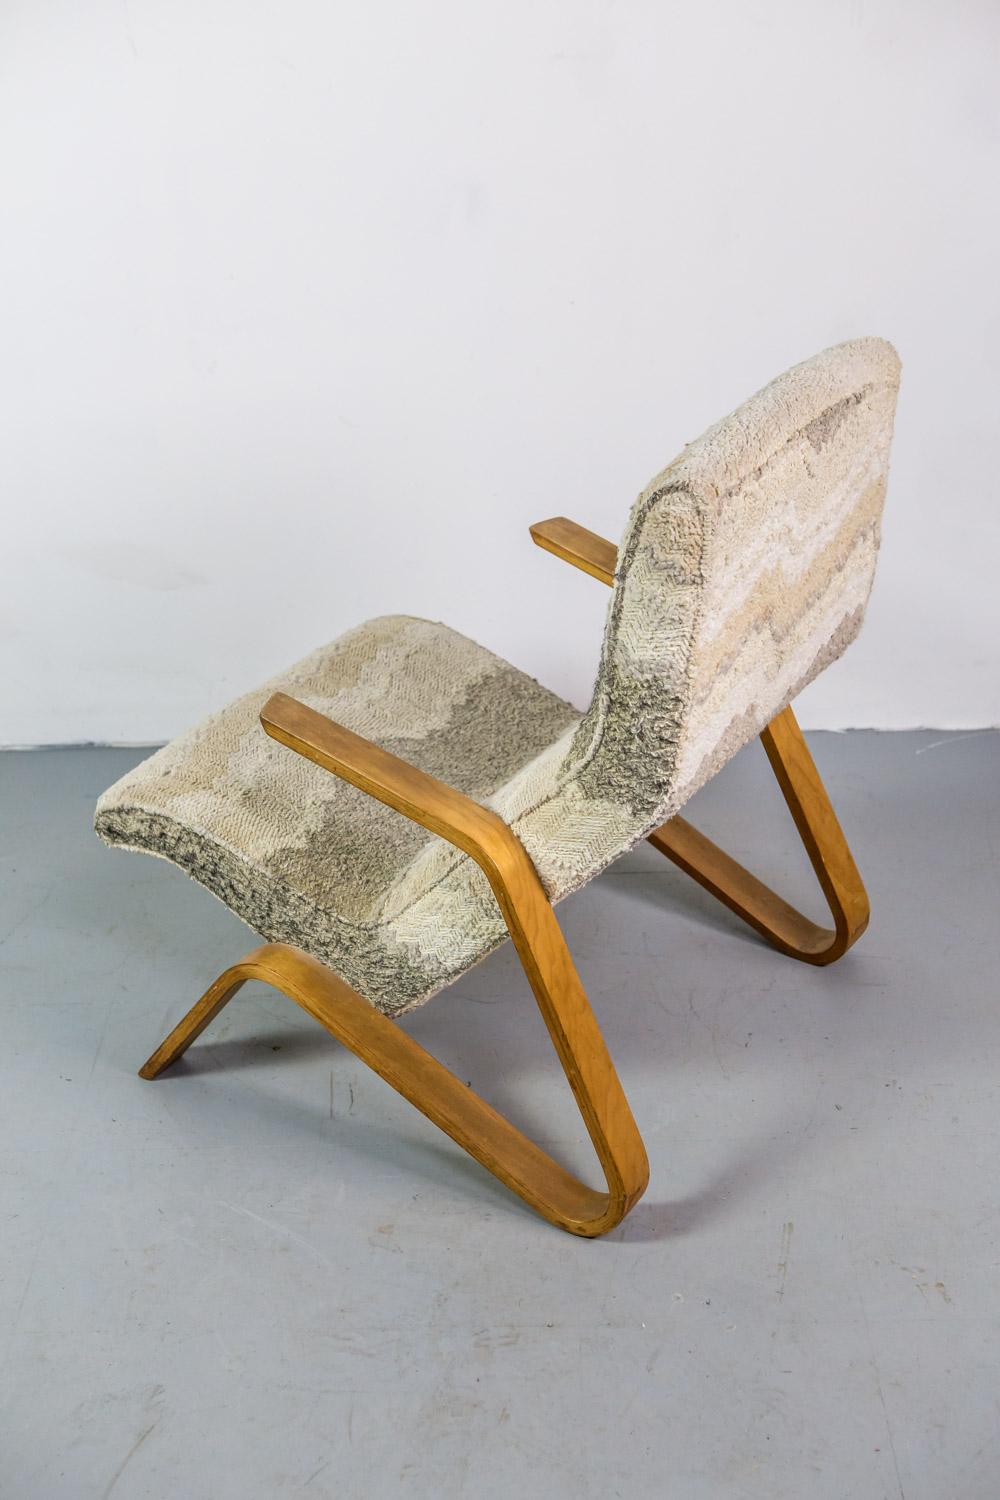 Mid-20th Century Early Grasshopper Chair by Eero Saarinen for Knoll